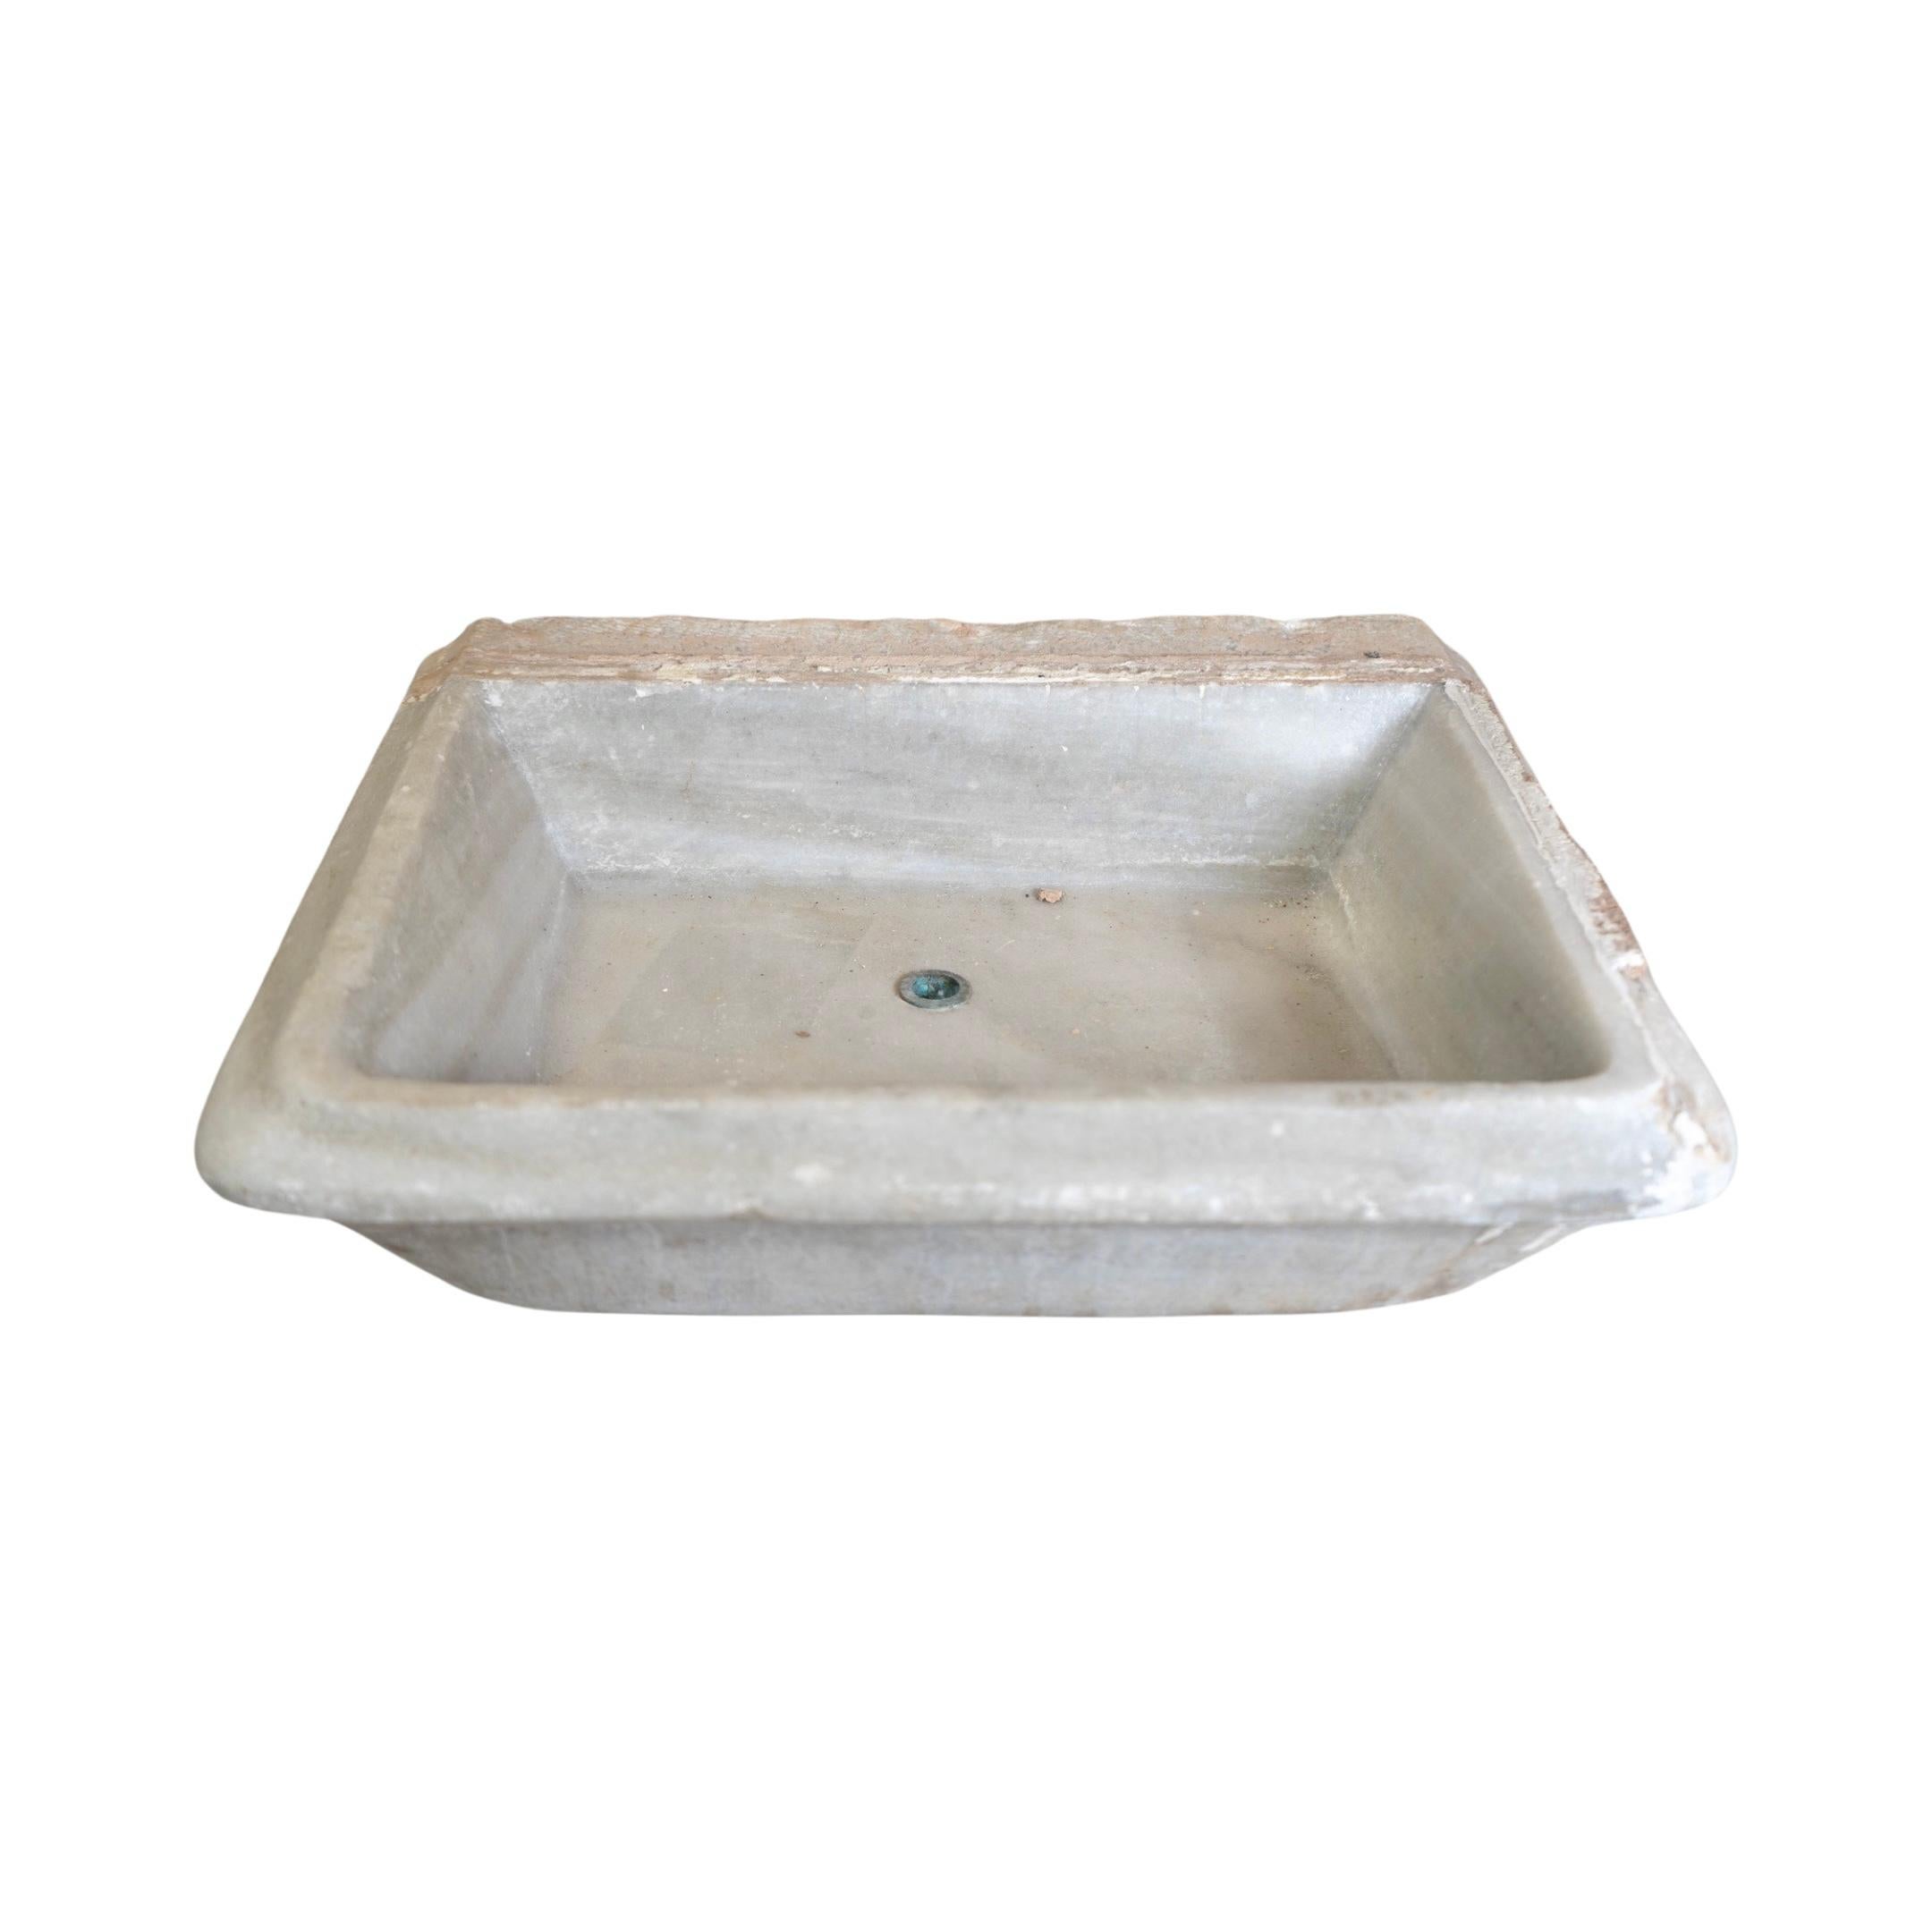 Made from exquisite Carrara Marble from France, this vintage 19th-century sink adds a touch of elegance to any space. Its small square shape is perfect for compact bathrooms and its durable stone construction ensures lasting beauty. Upgrade your